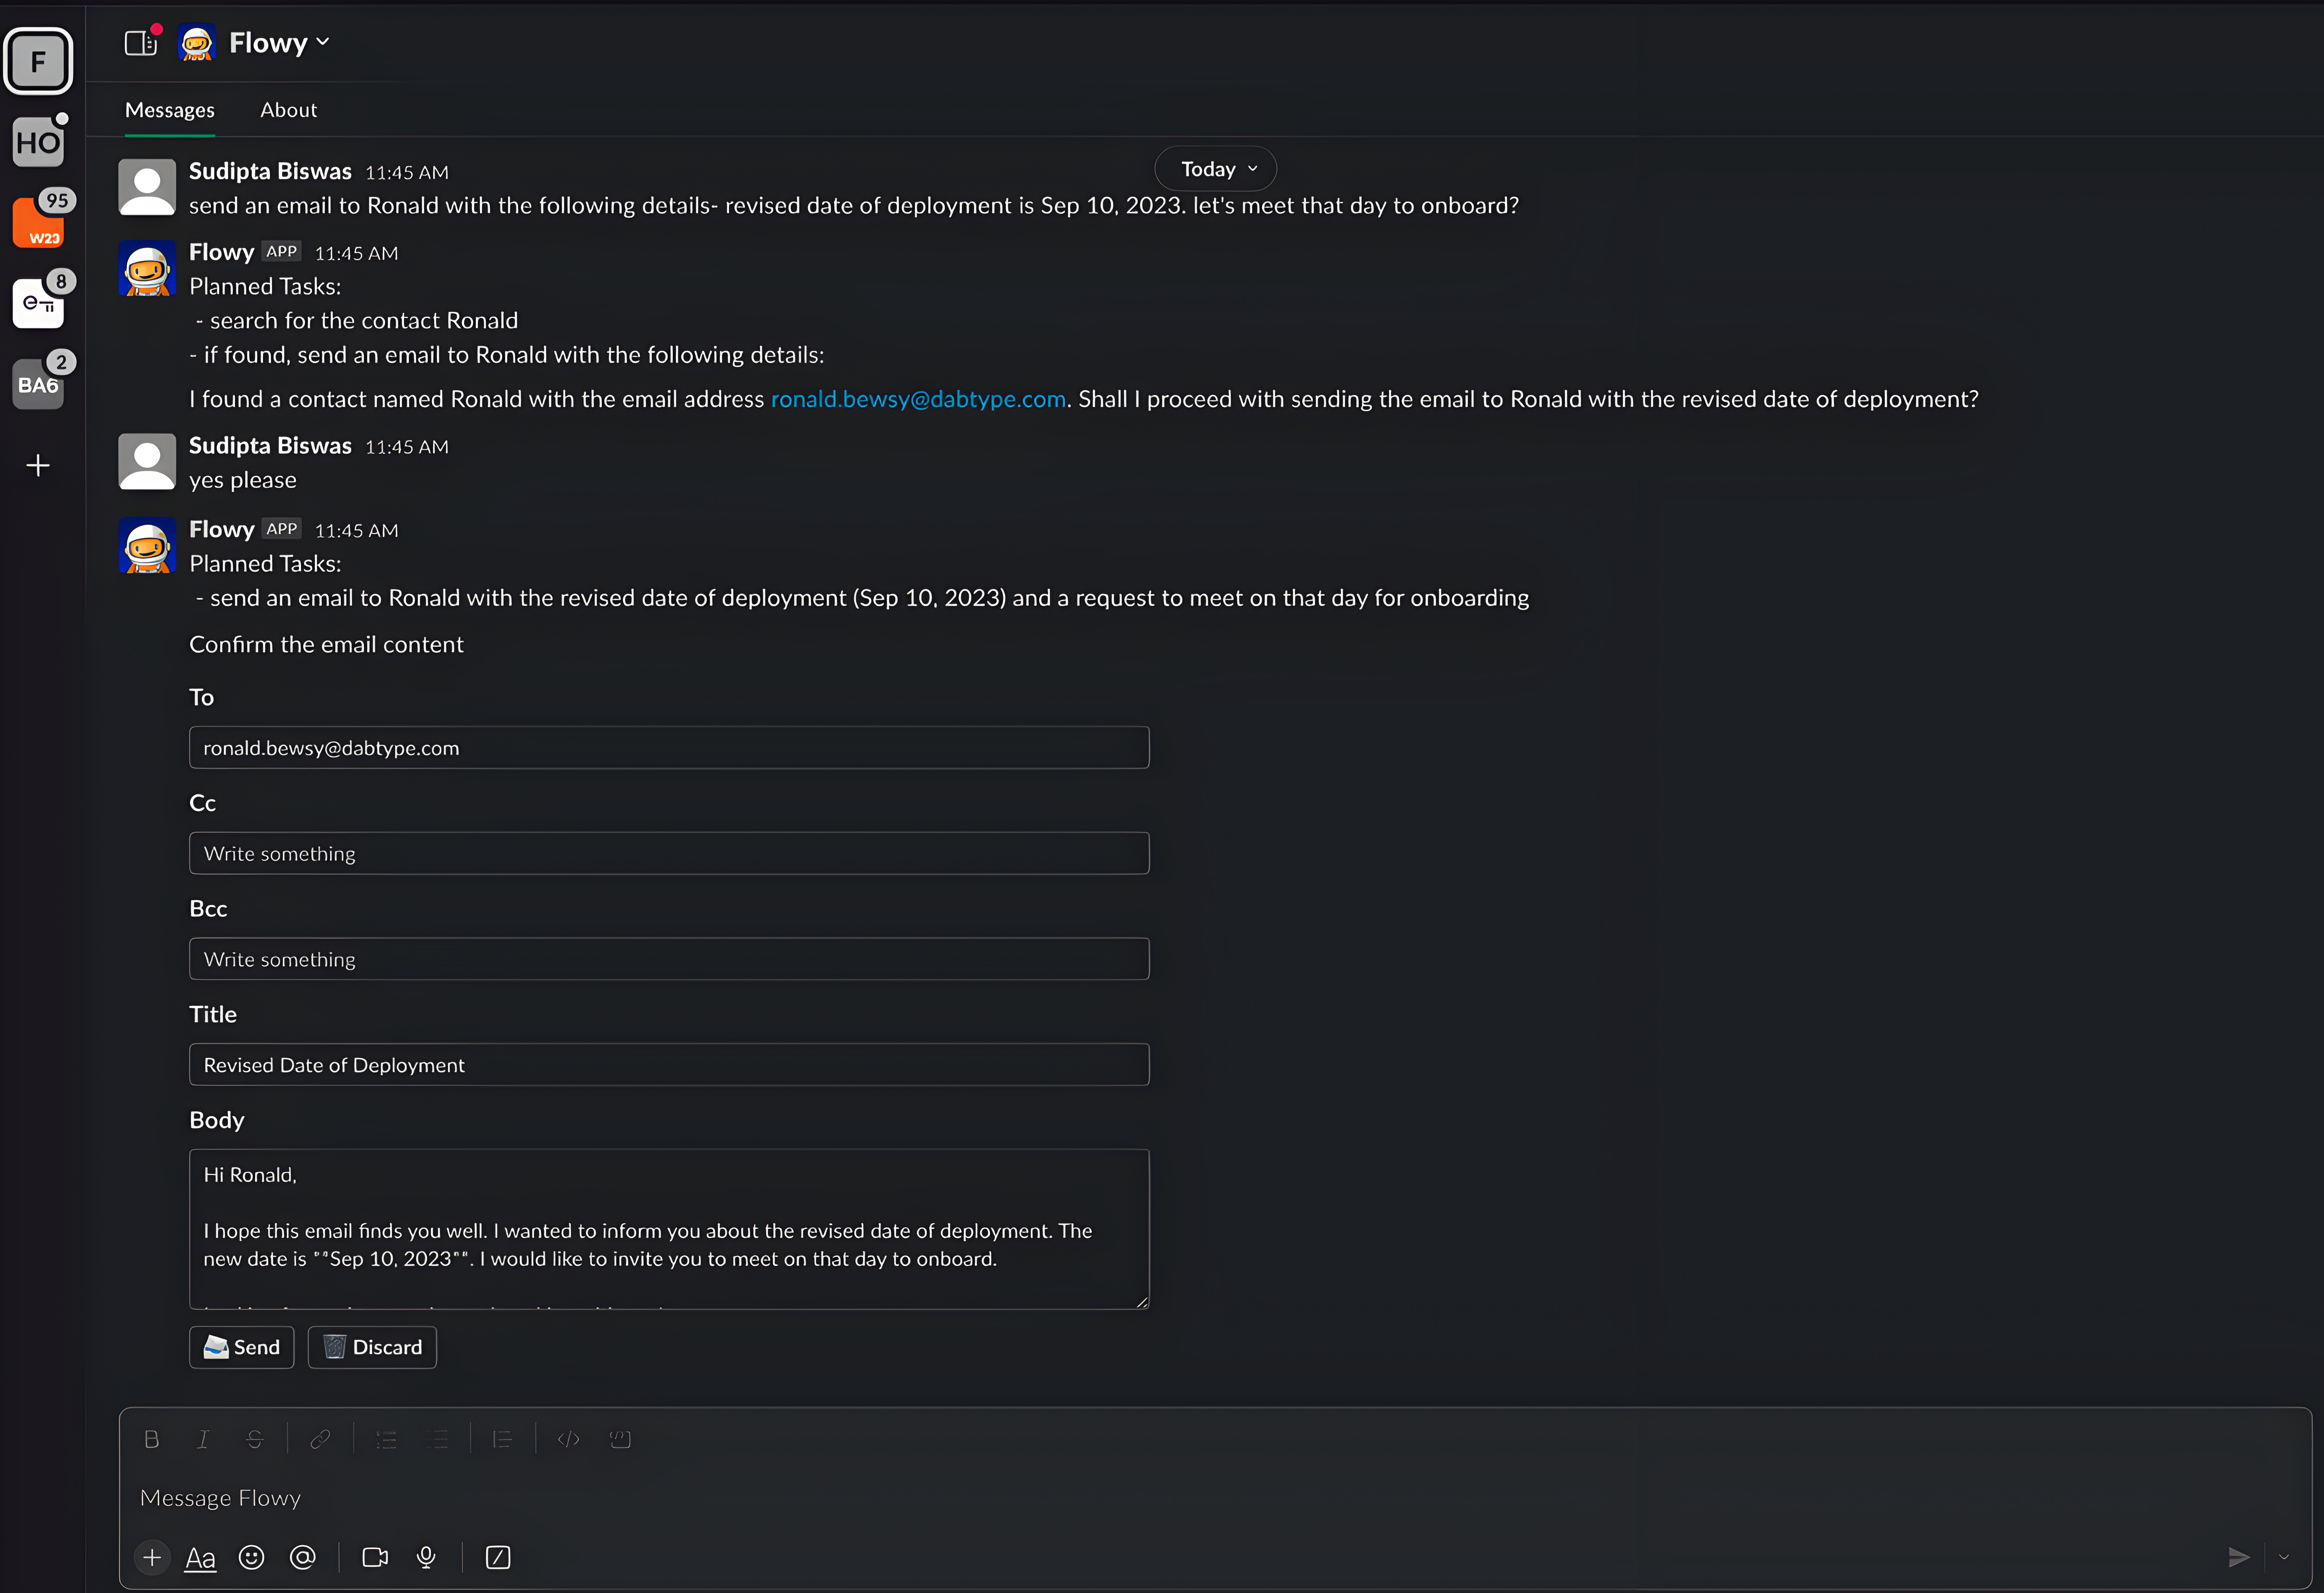 Floworks product screenshot. In Slack, there is a conversation between a worker and the Floworks chatbot asking it to set up a meeting and send an email.